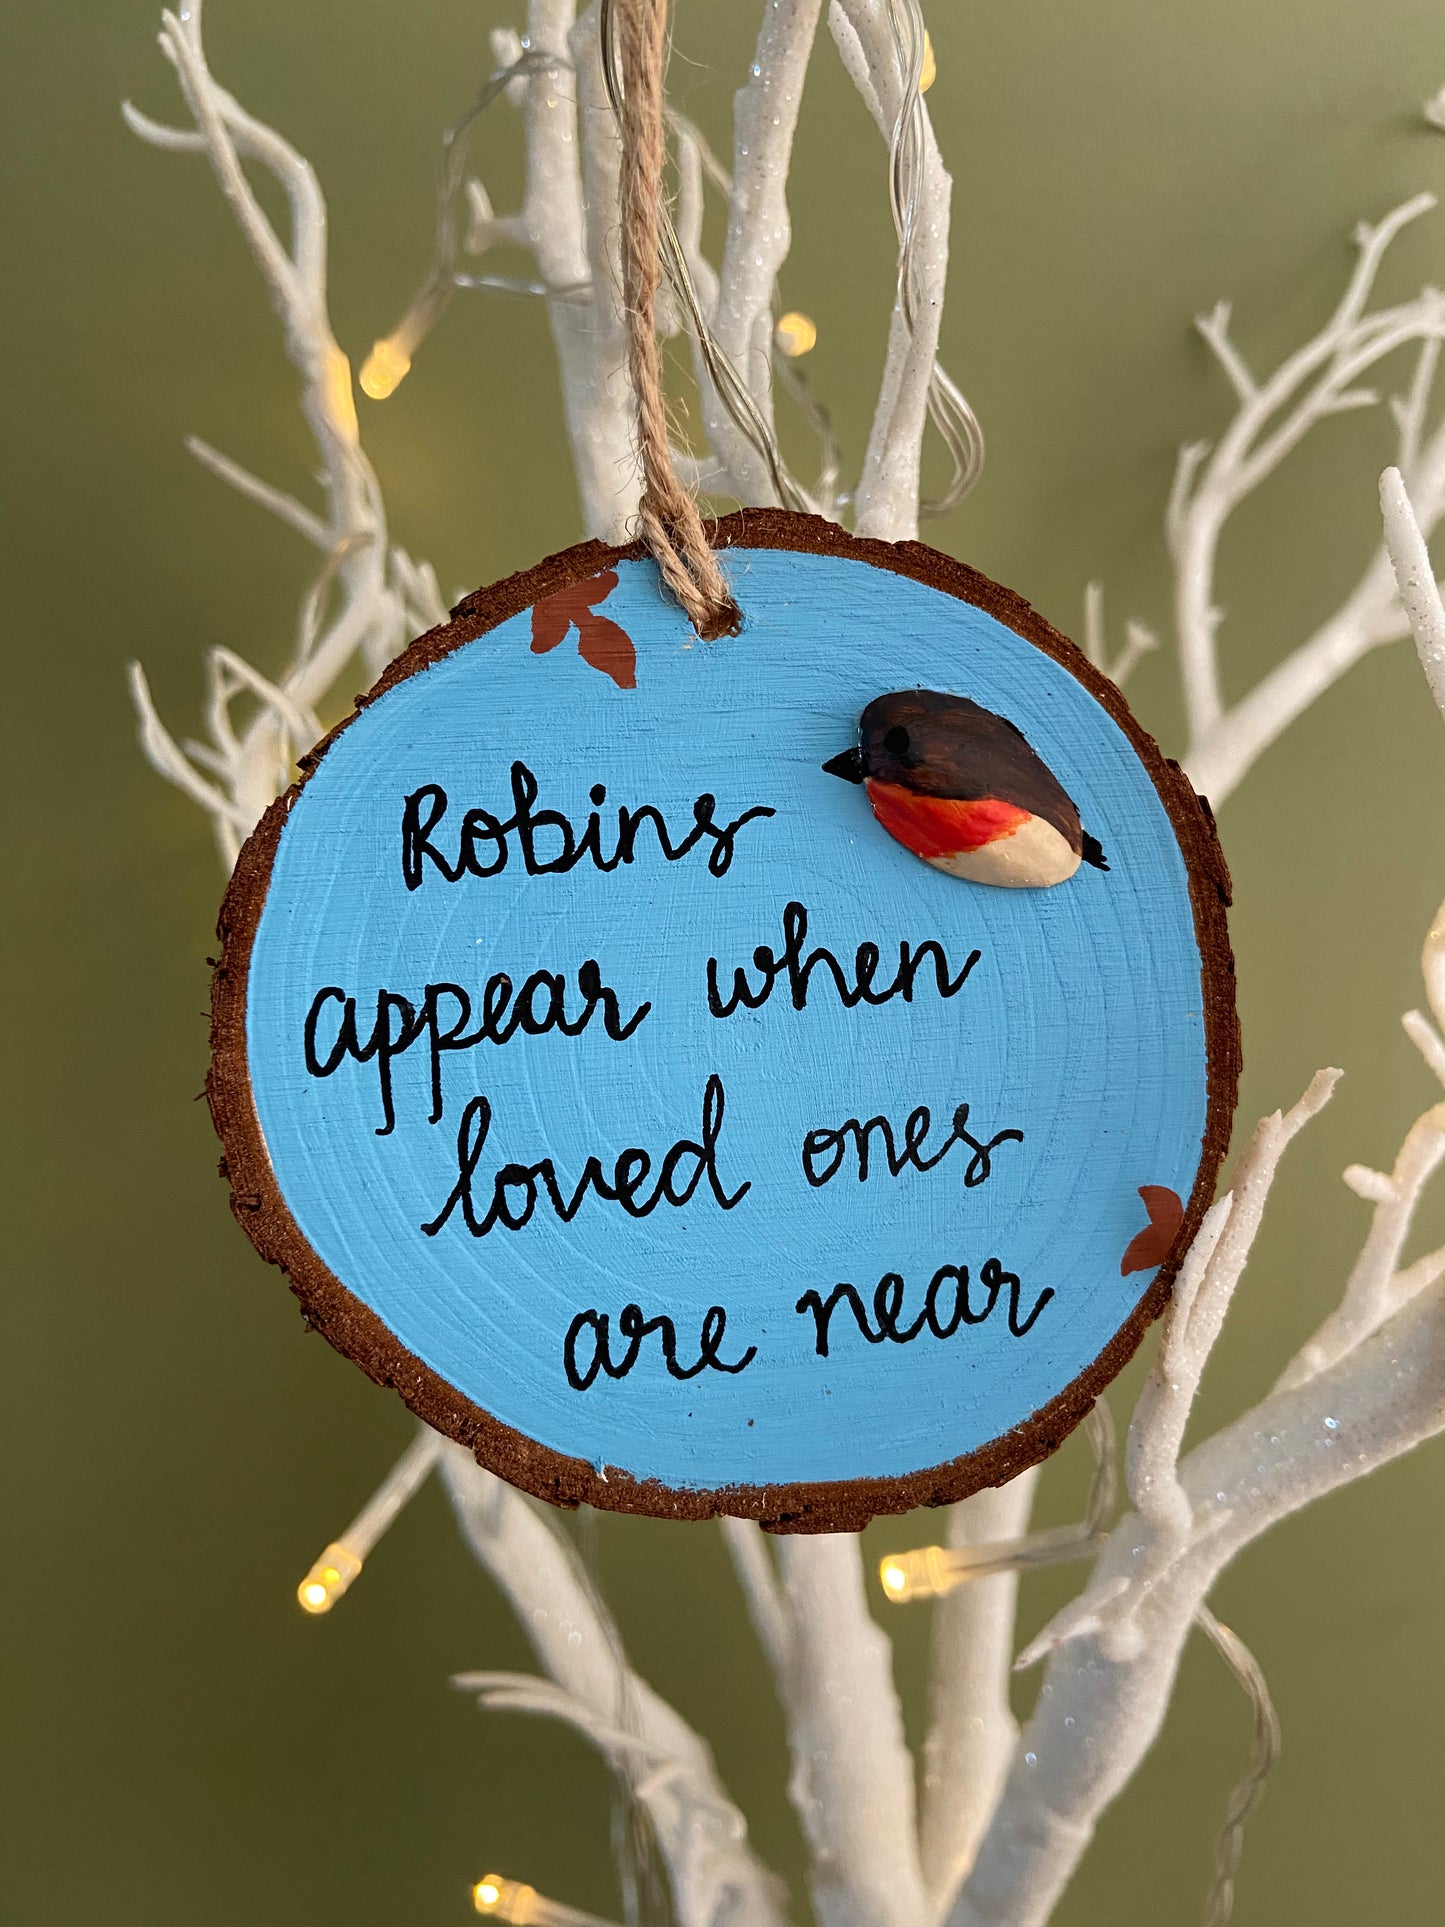 Robins appear when loved ones are near